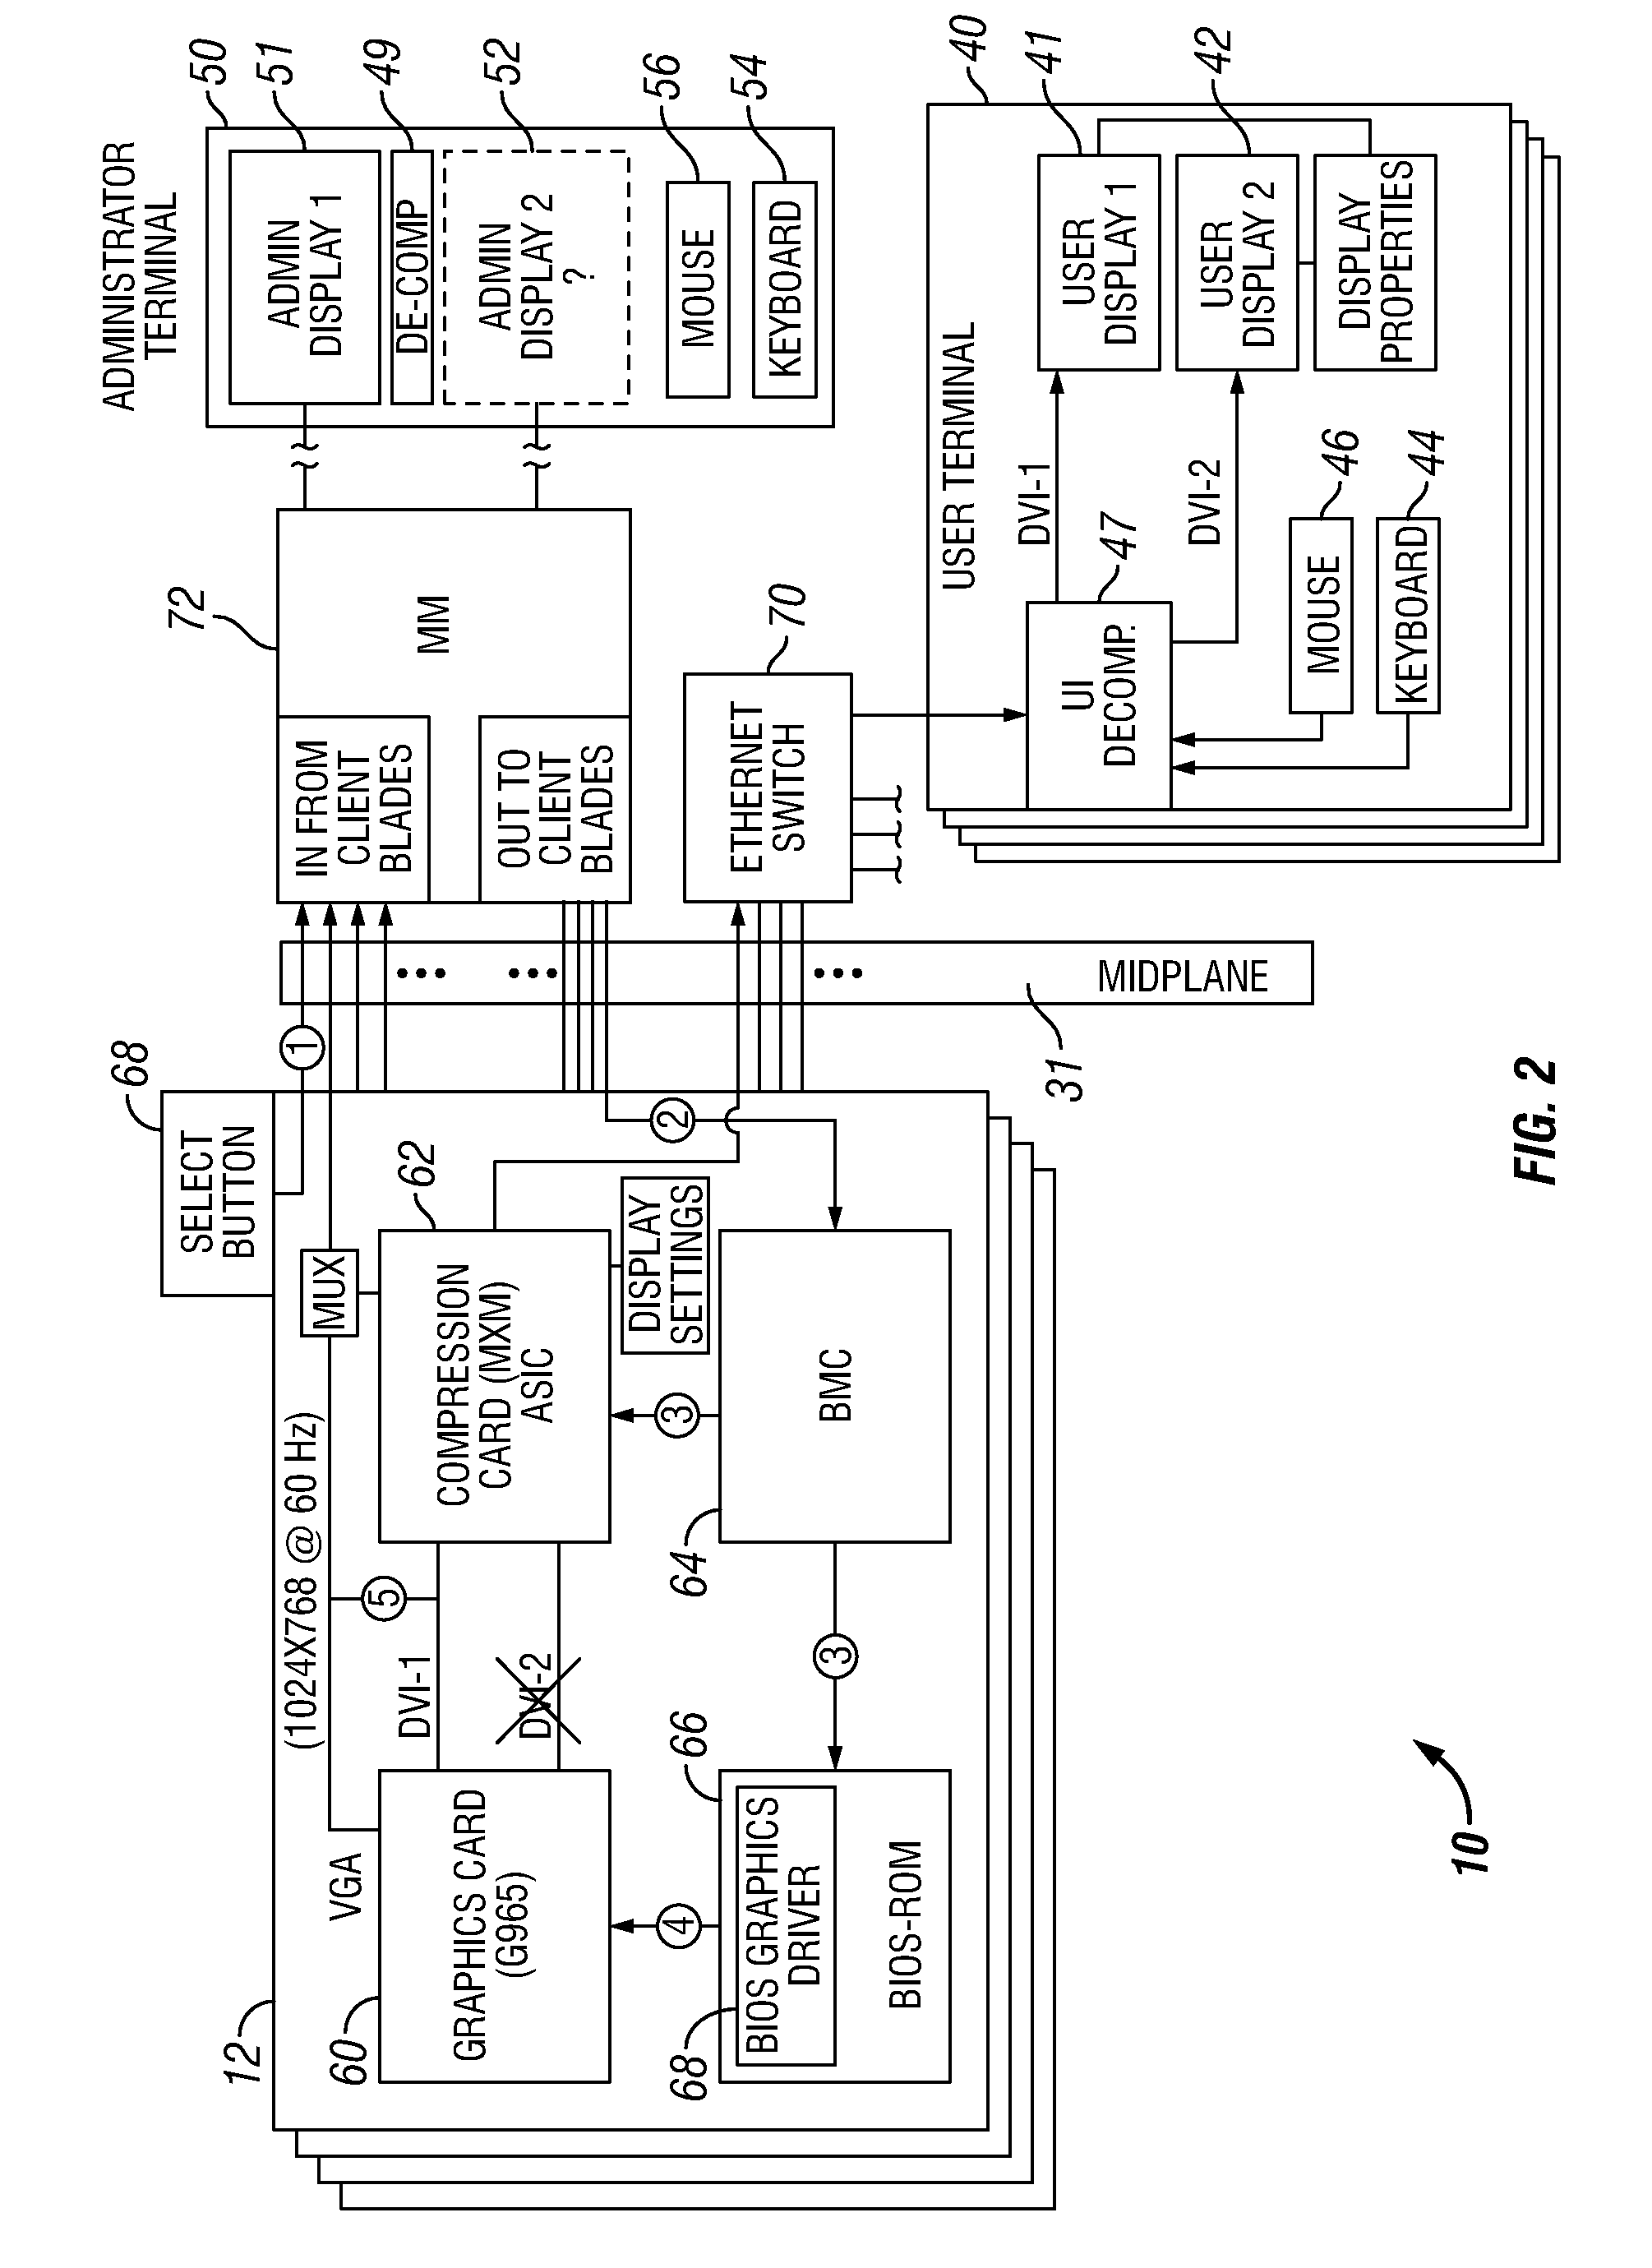 Automatic adjustment of display settings for remote viewing by an administrator